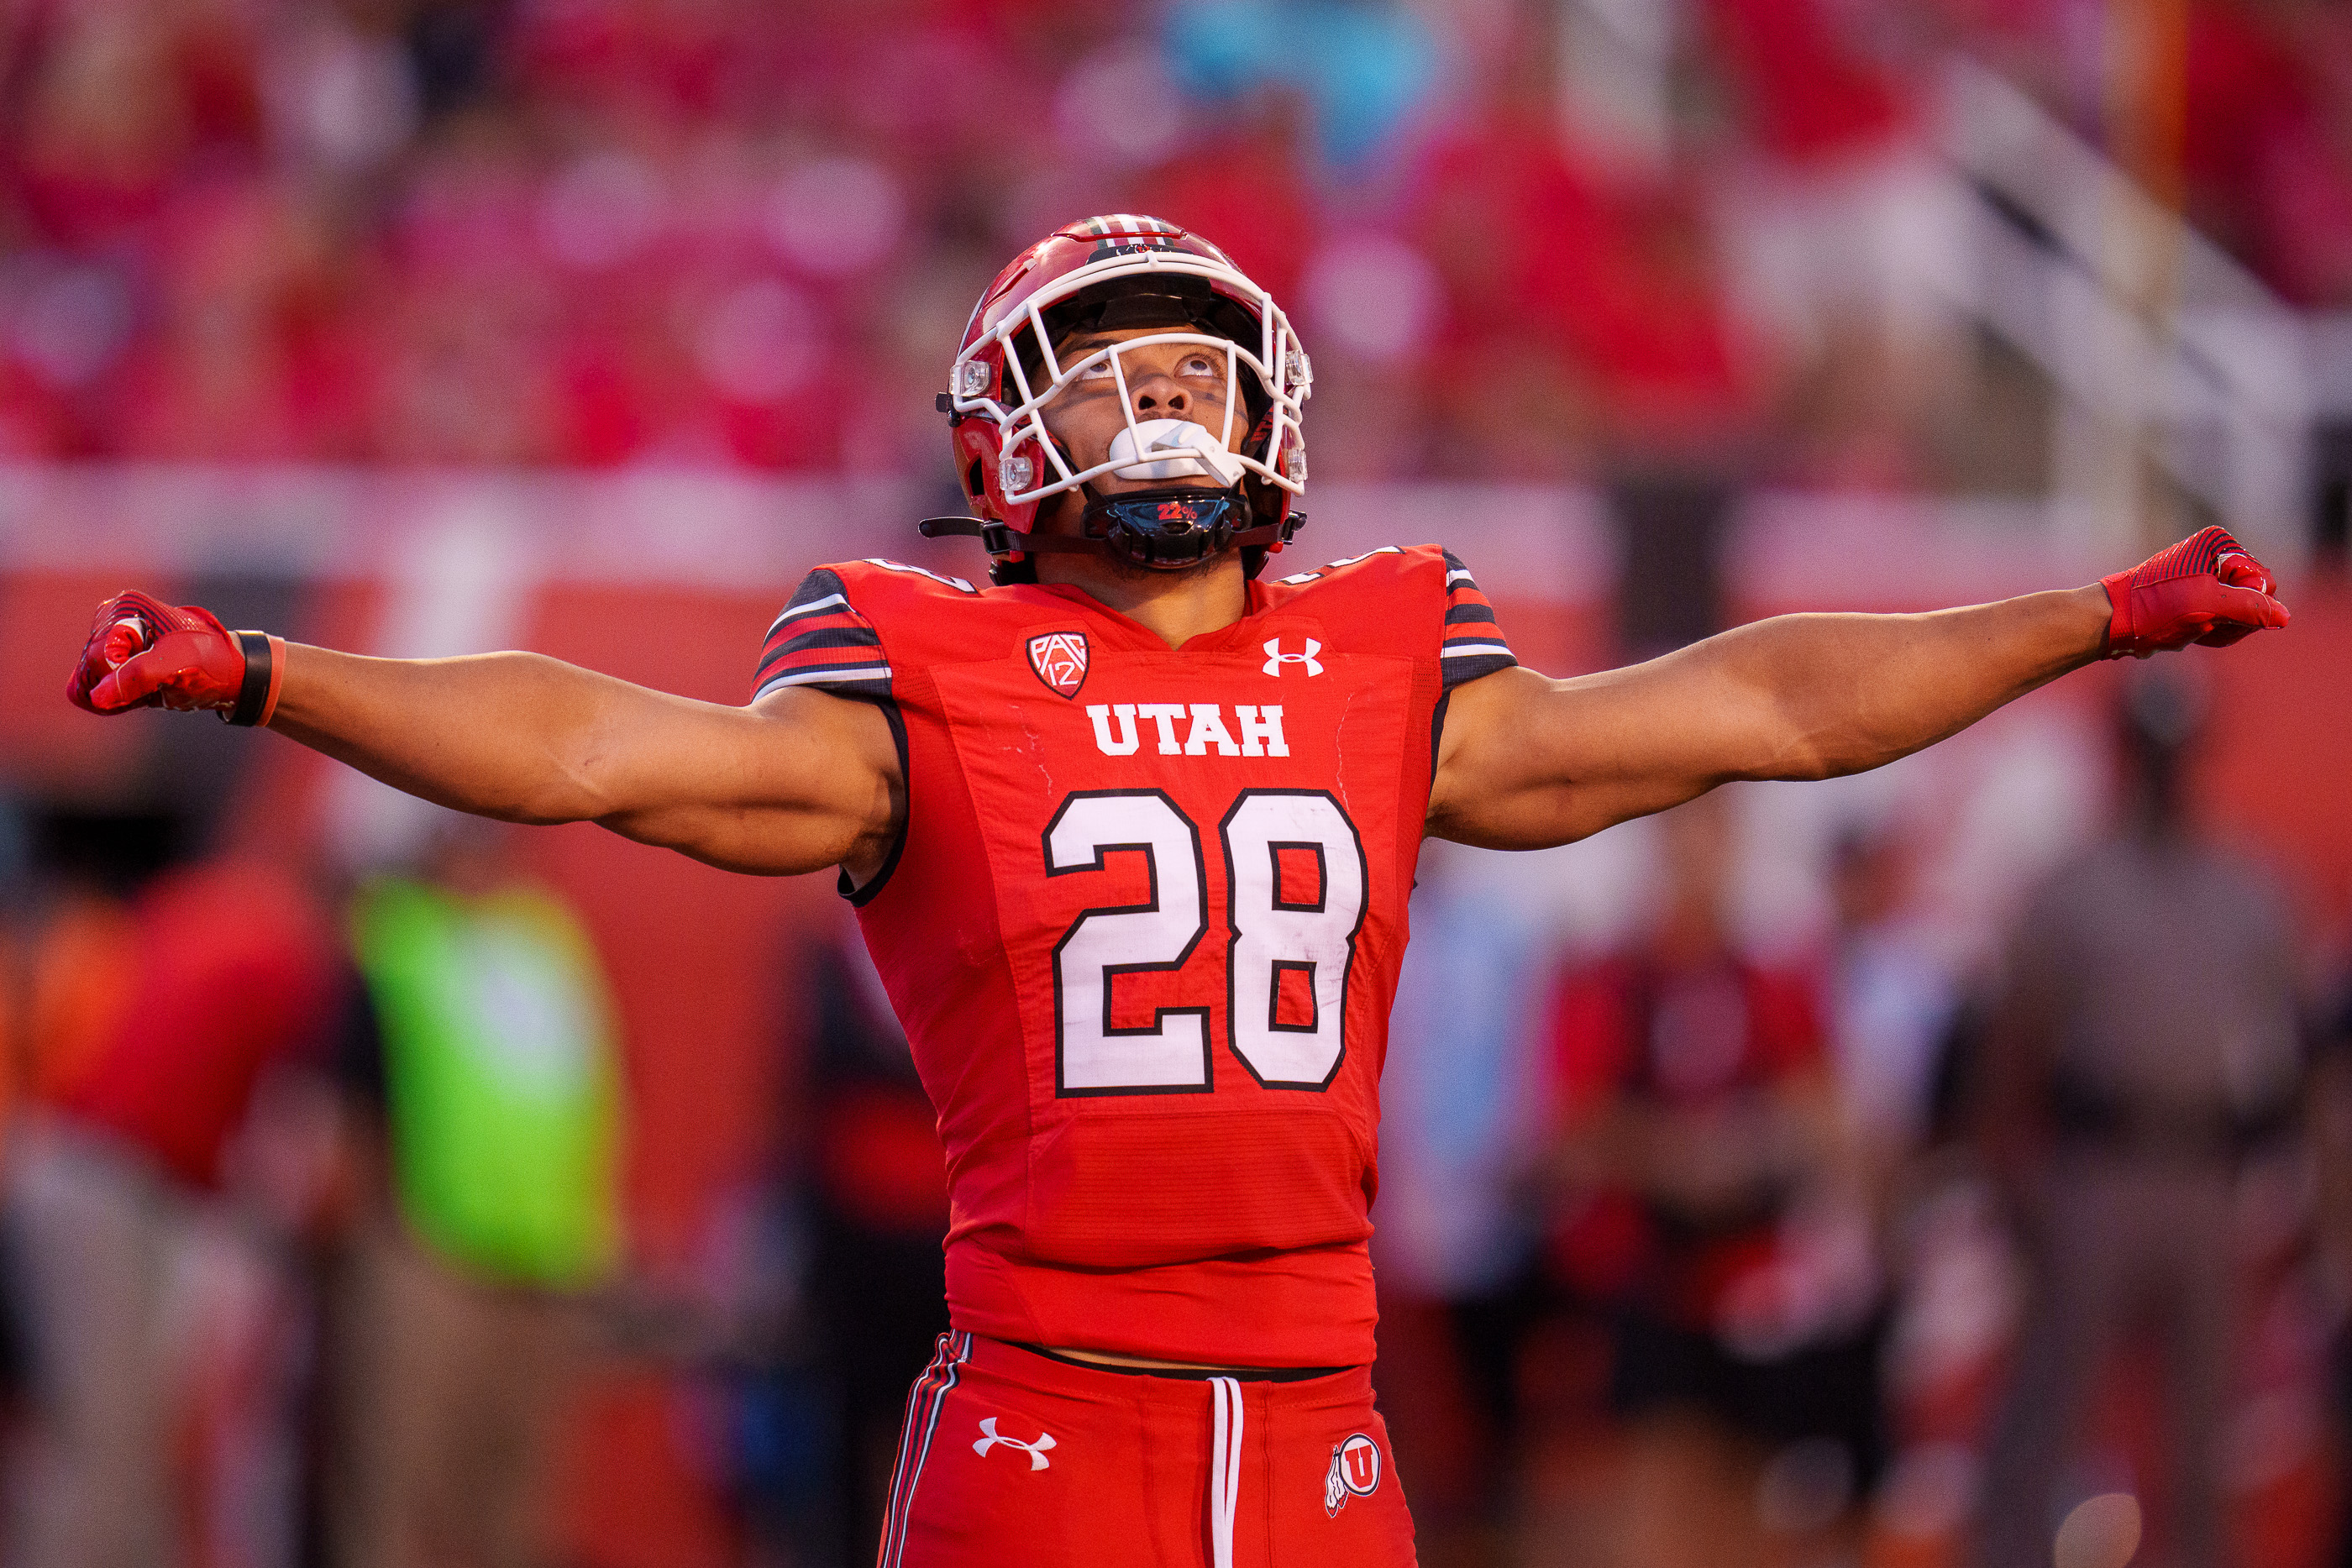 Utah's Sione Vaki will continue as a two-way player